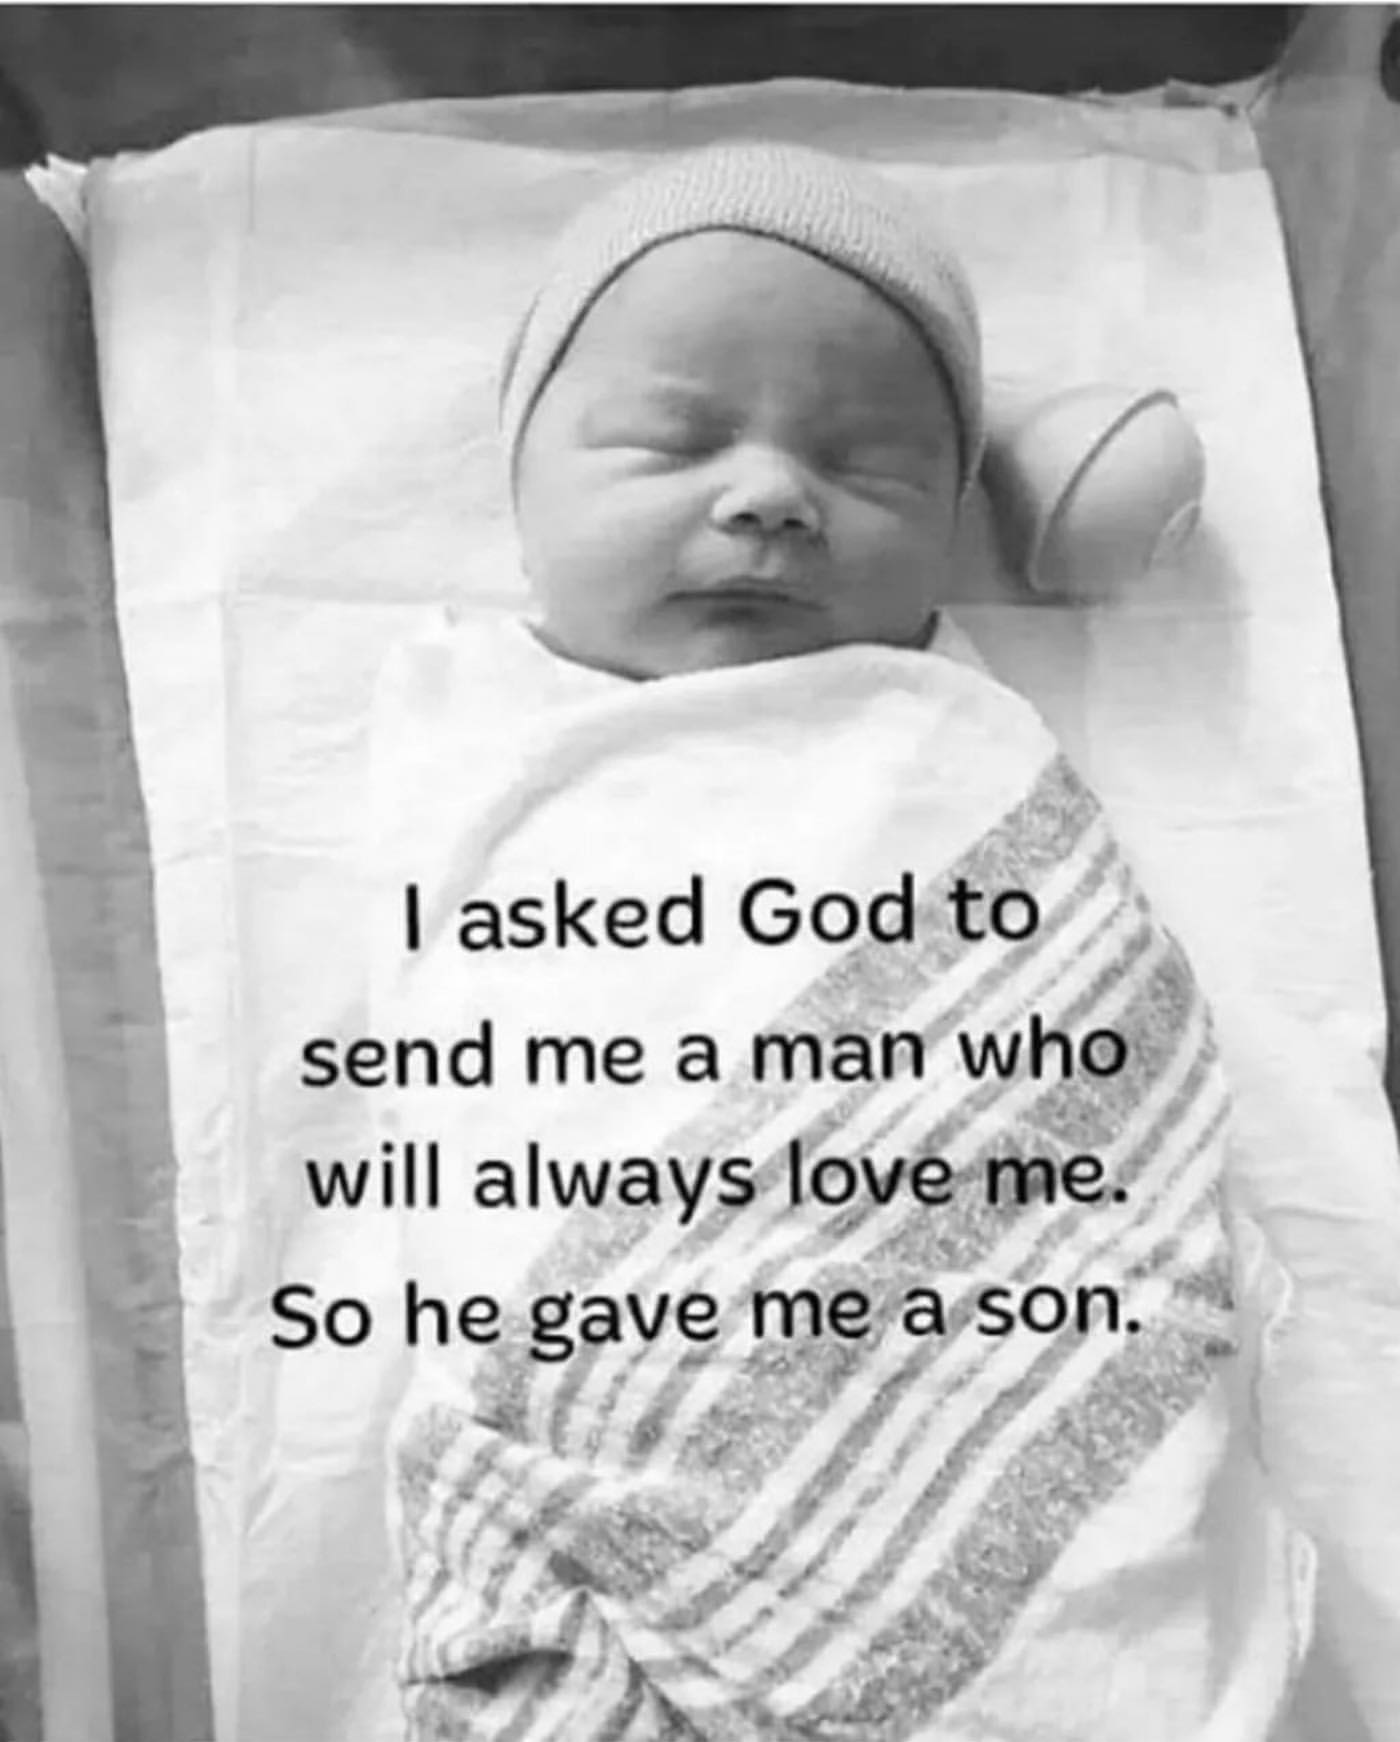 I asked God to send me a man who will always love me. So he gave me a son: